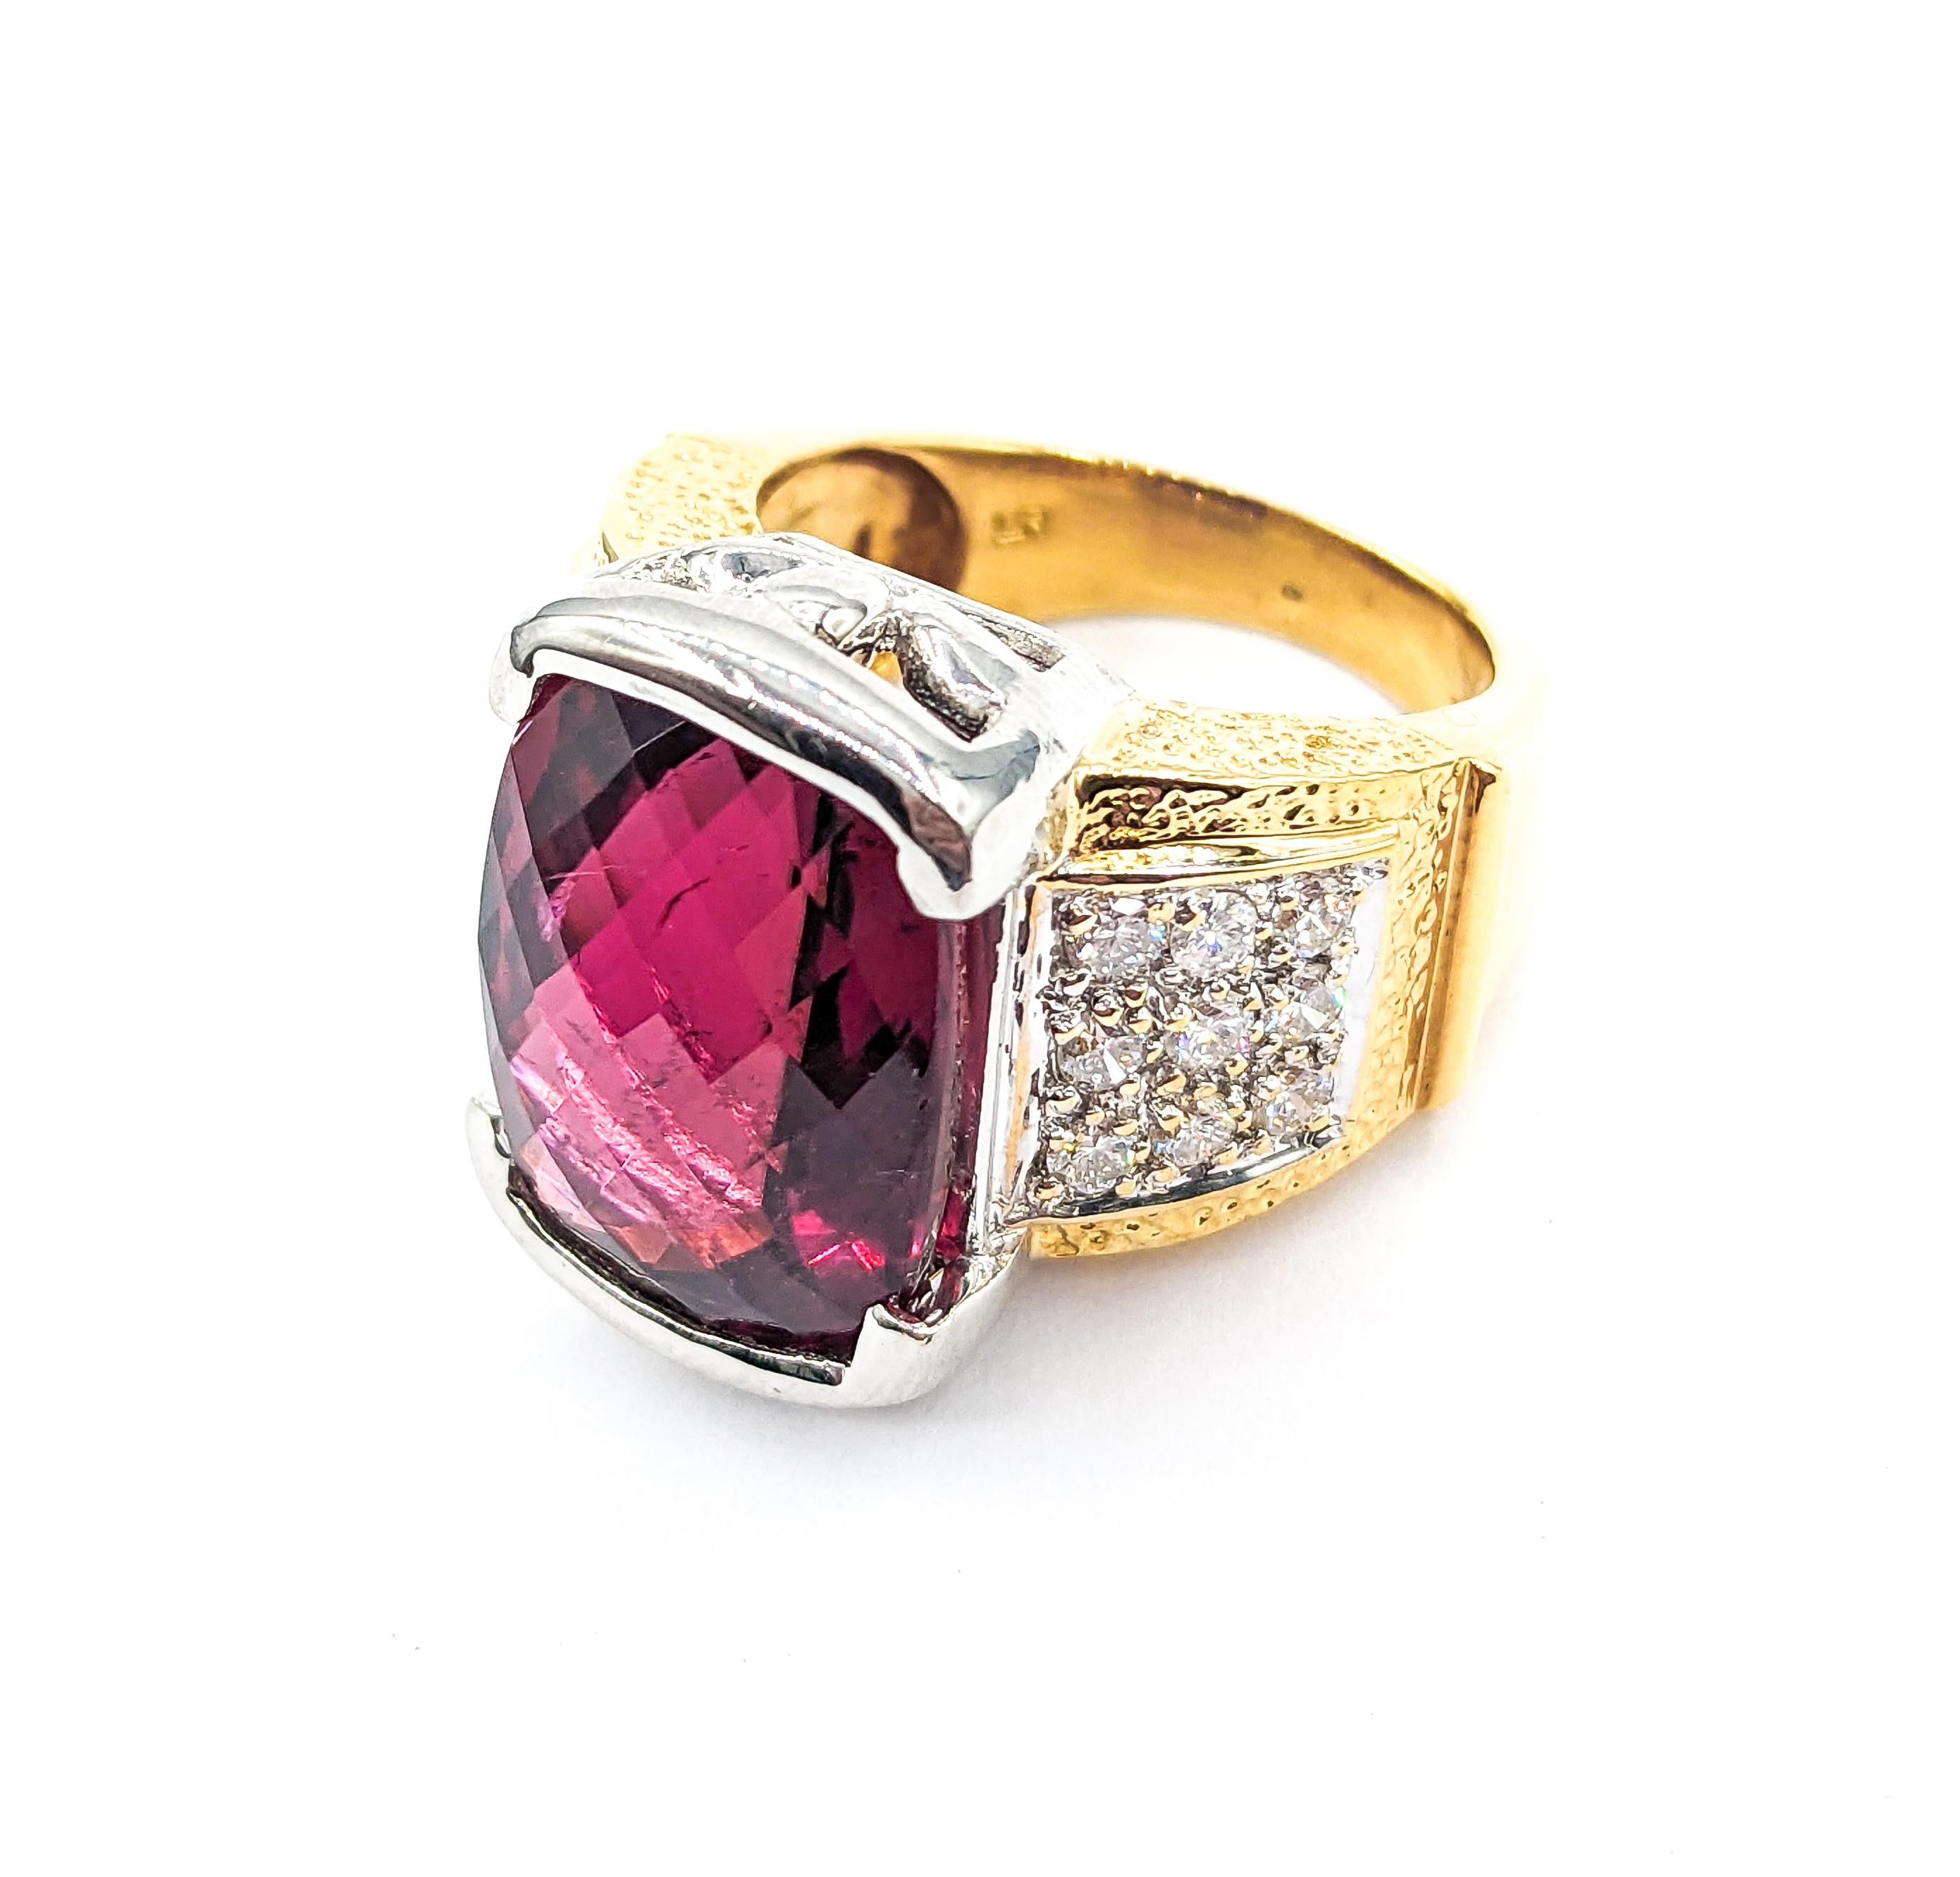 Rough Cut 9.50ct Rubellite Tourmaline & .36ctw Diamond Ring In Two-Tone Gold For Sale